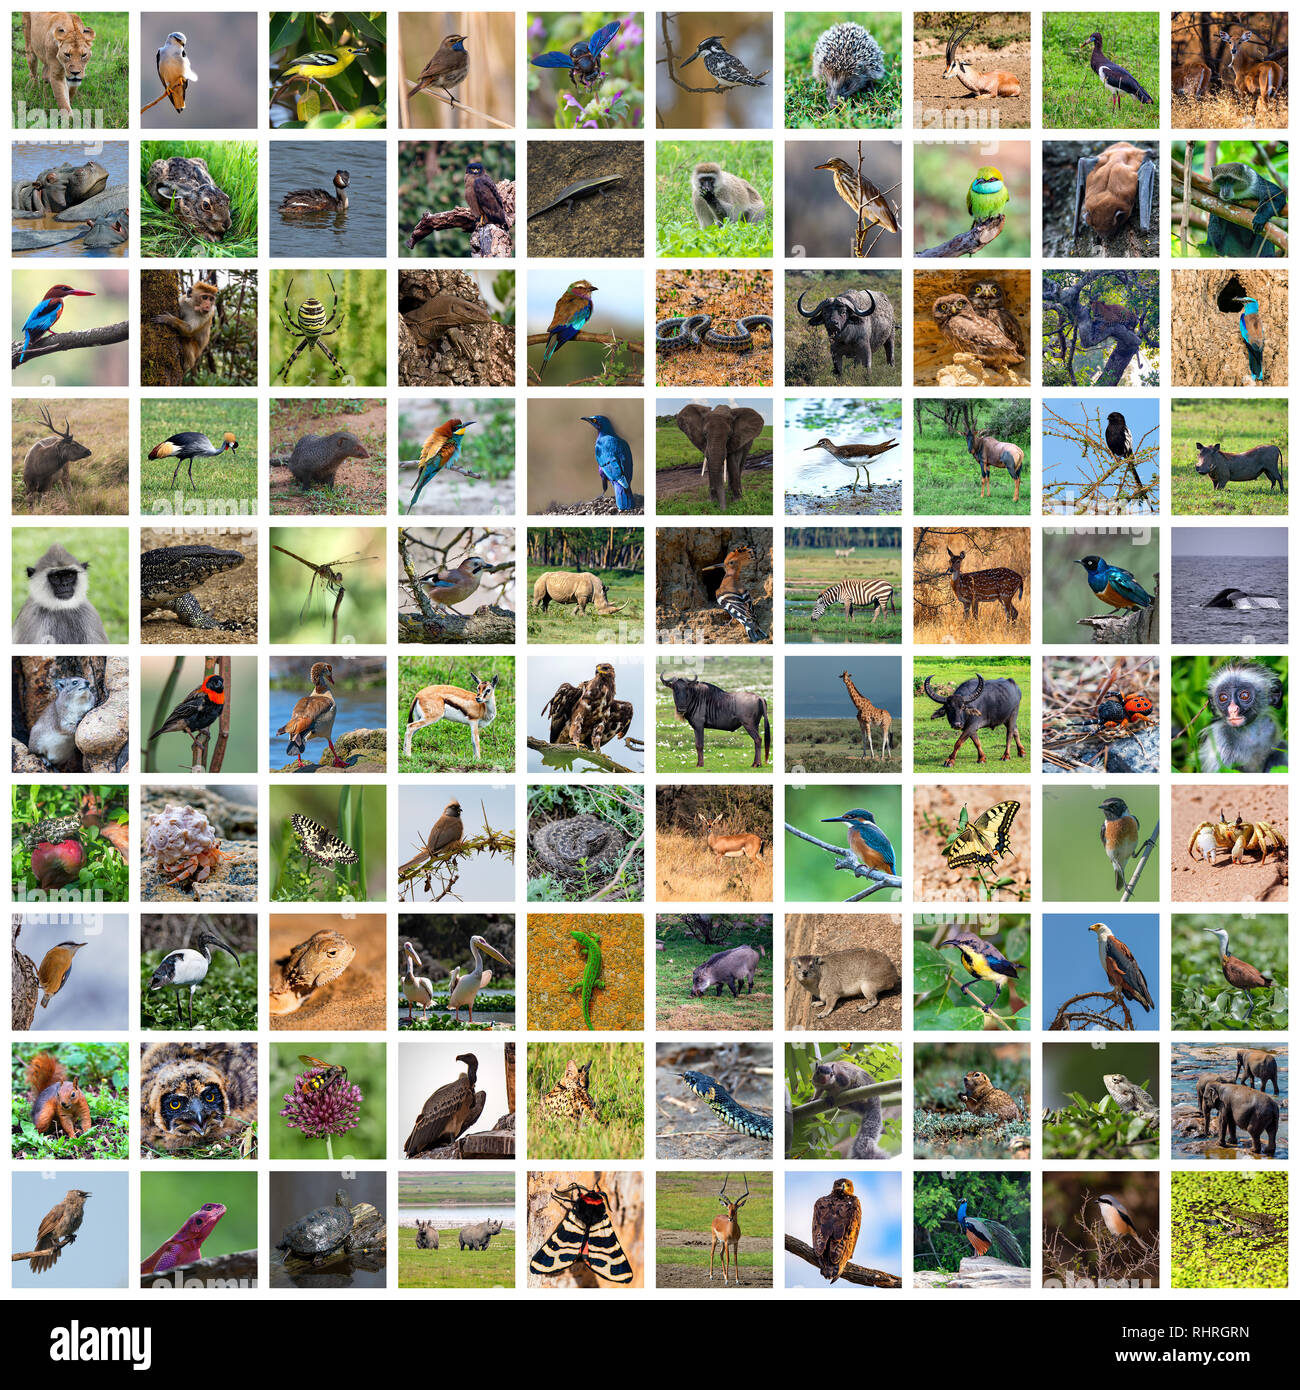 Collection of wildlife and animals of the world photos Stock Photo